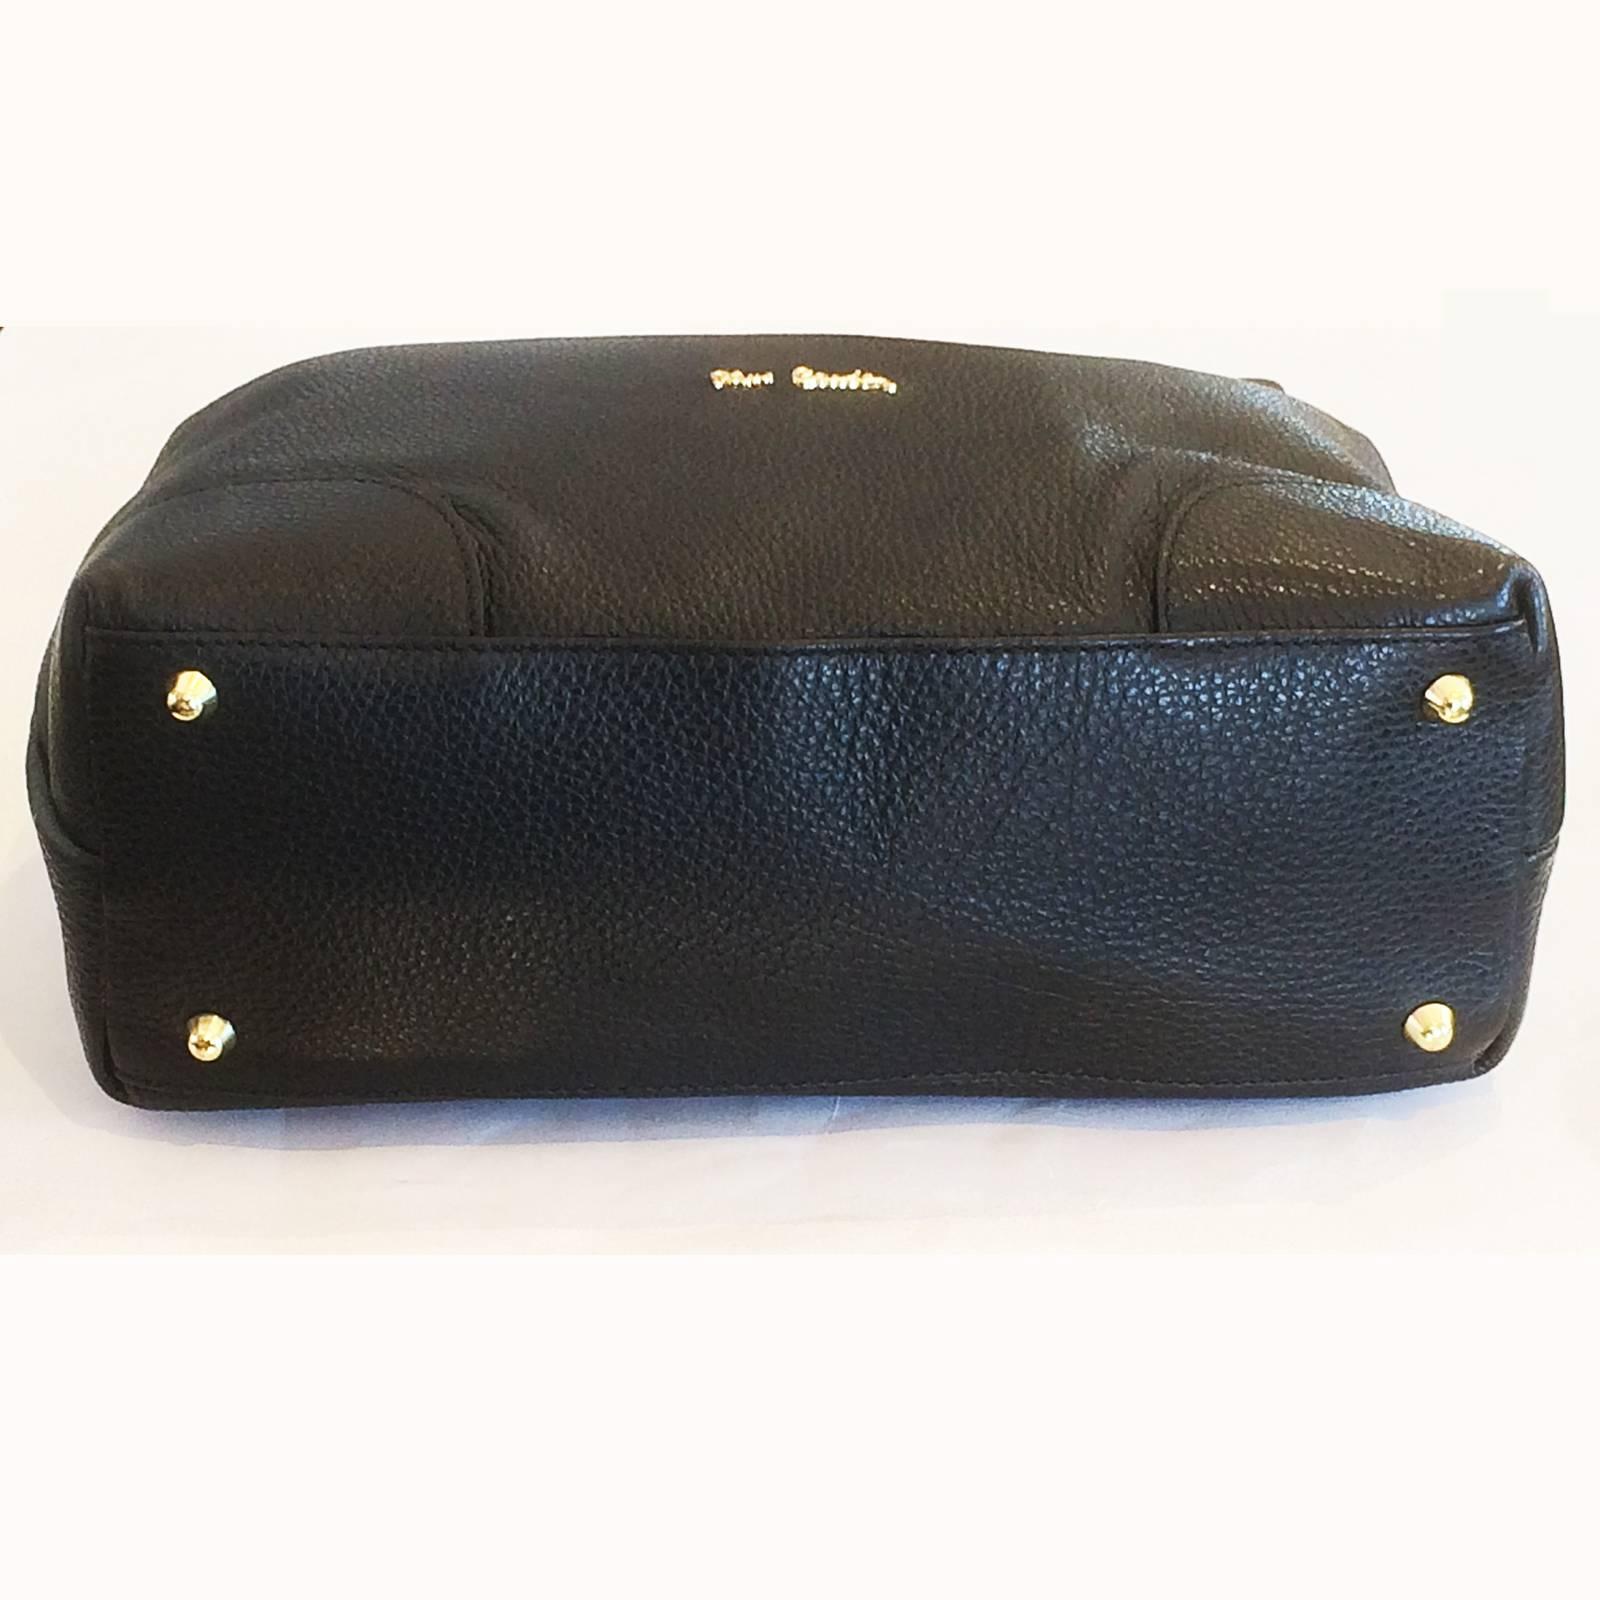 Pierre Cardin Handbag in Black Caviar pattern Leather. Fitted Internally with a slip Pocket to one side, zipped pocket to other, and larger, full width zip to top of bag, Cylinder finger grip to zip end, all in gilt finish, including Script name to